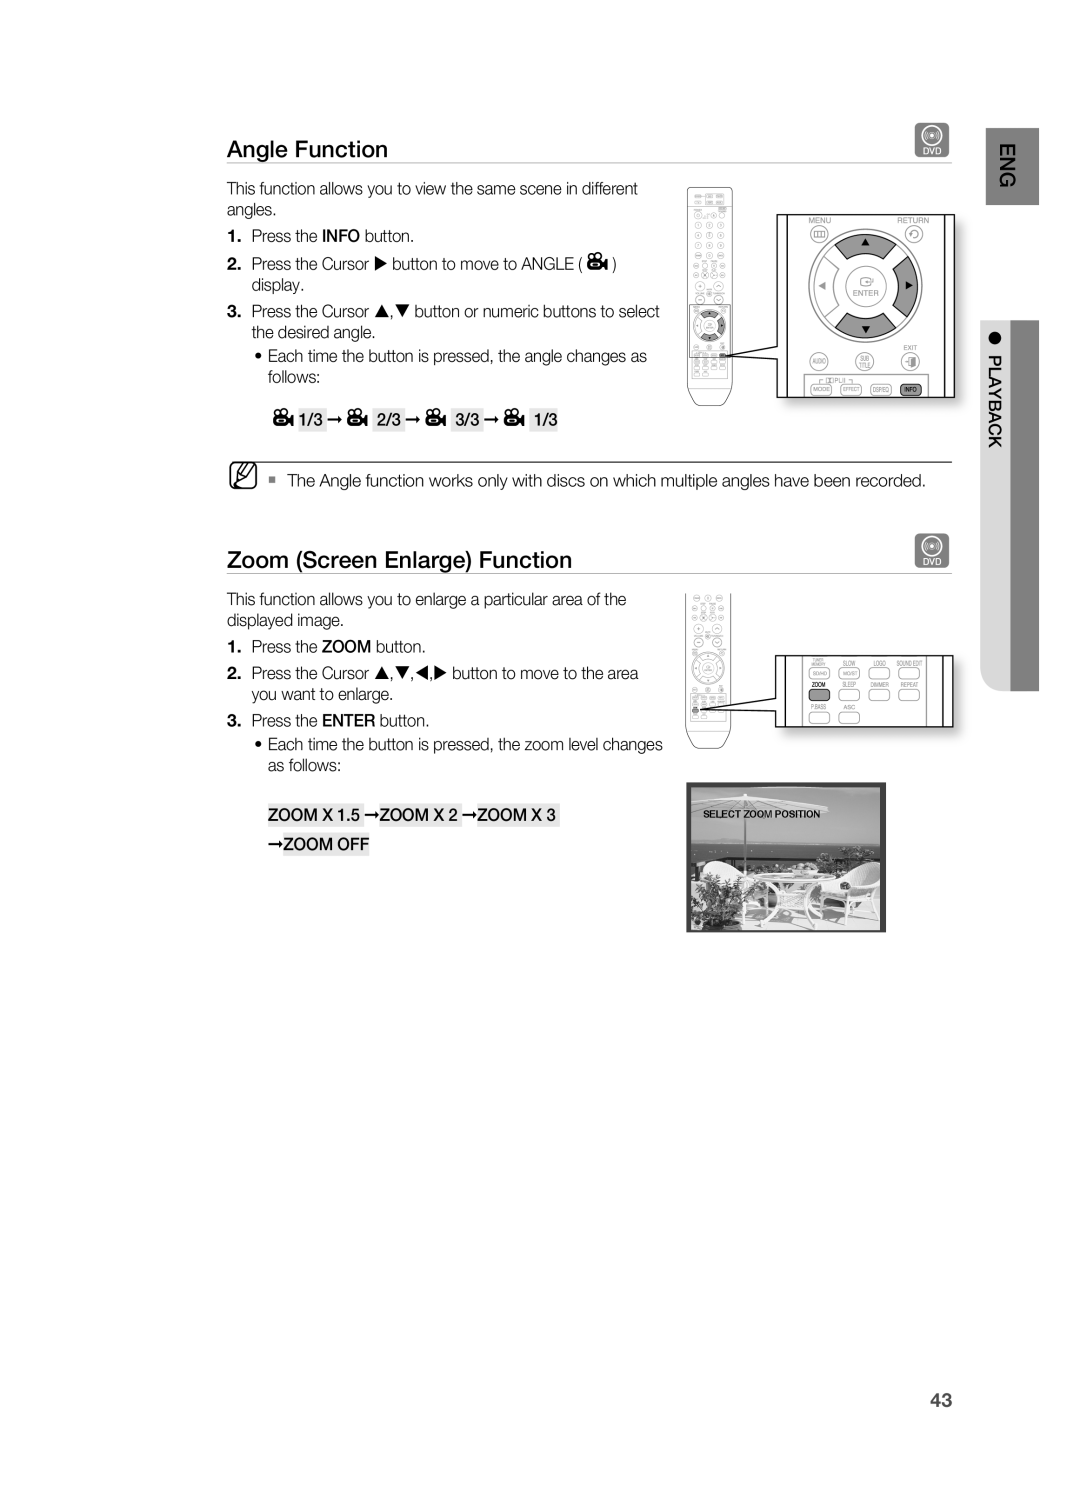 Samsung HT-TWZ415 user manual Angle Function, Zoom Screen Enlarge Function 